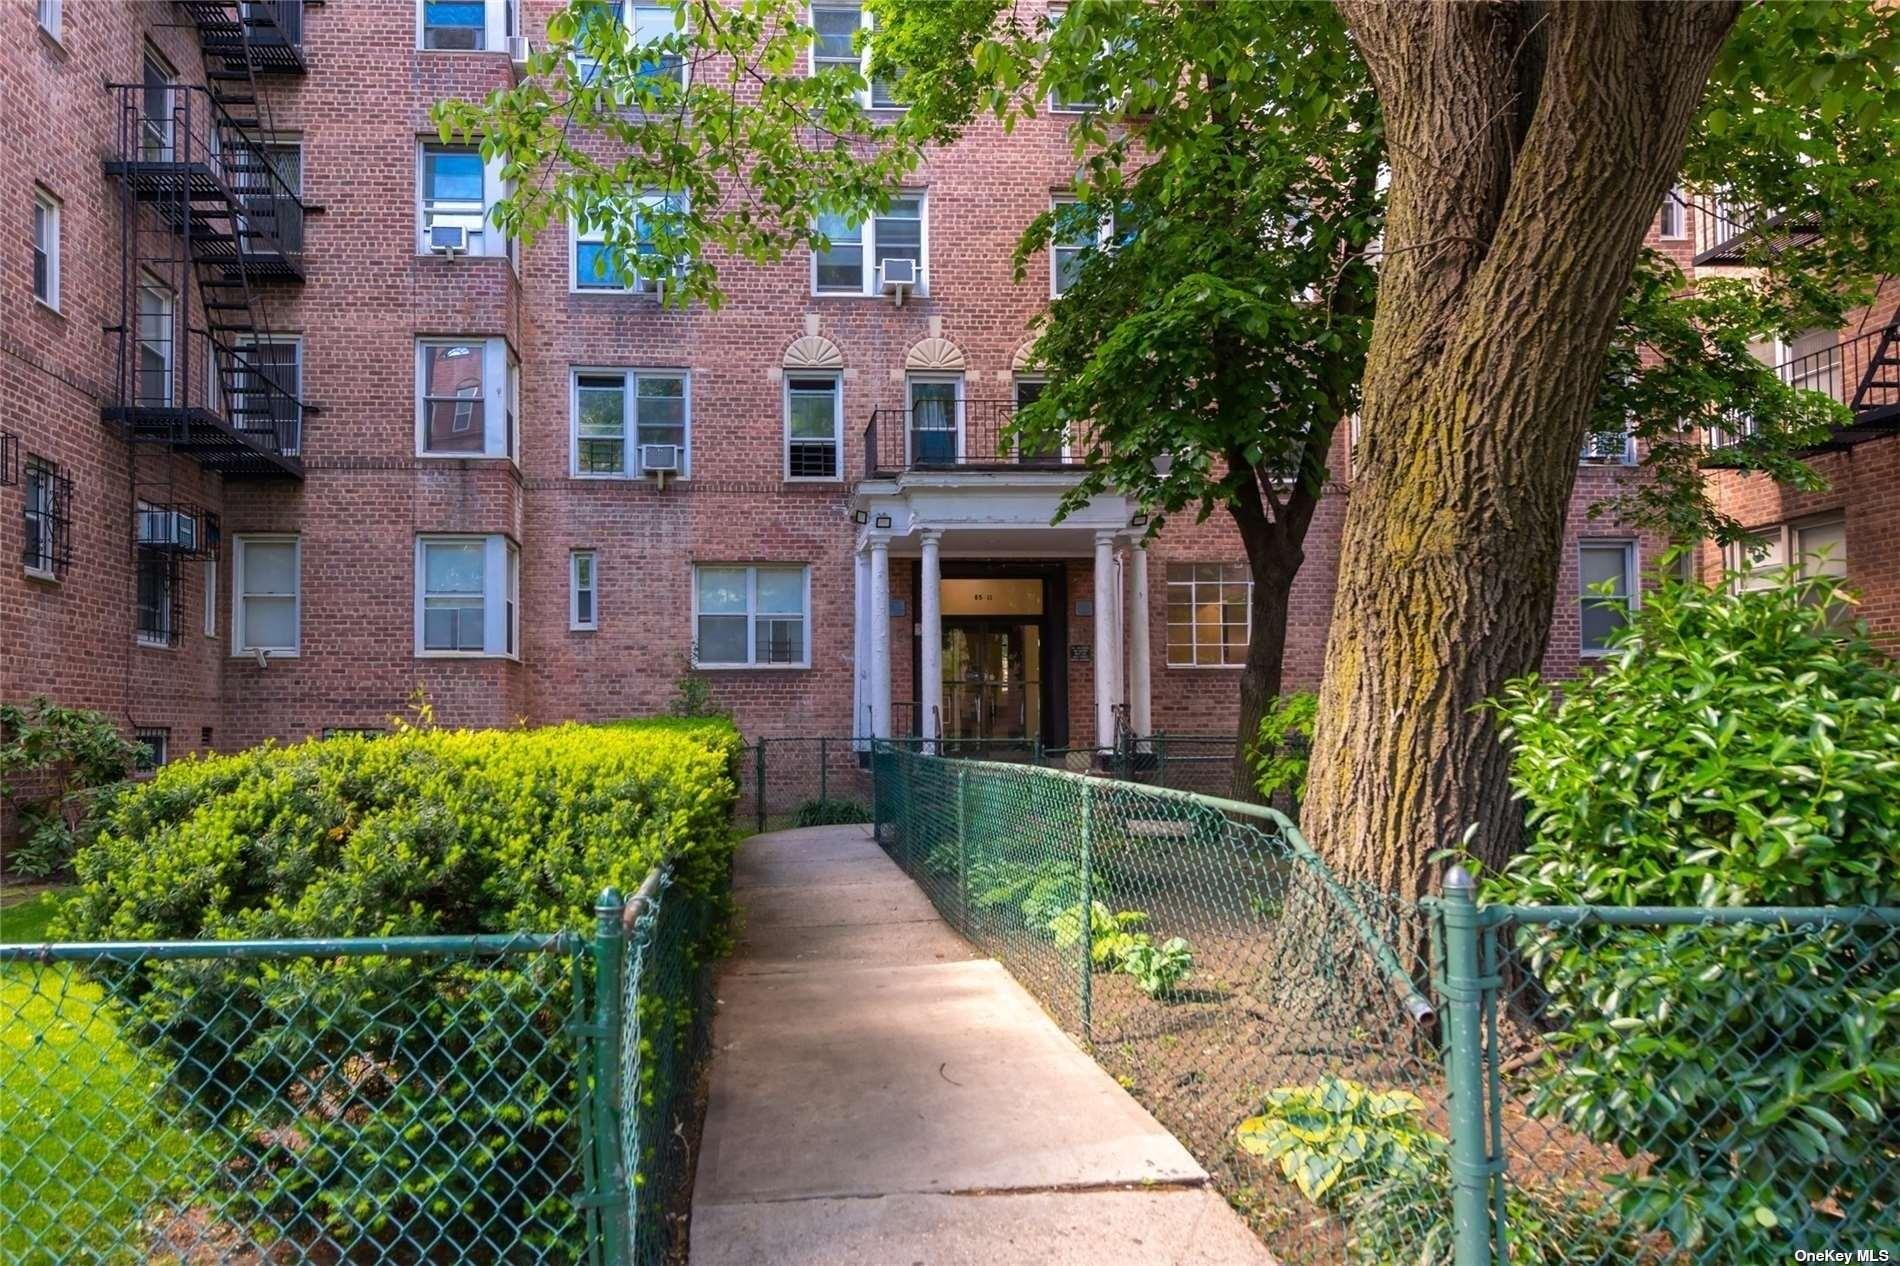 85-11 34th Avenue #2E in Queens, Jackson Heights, NY 11372